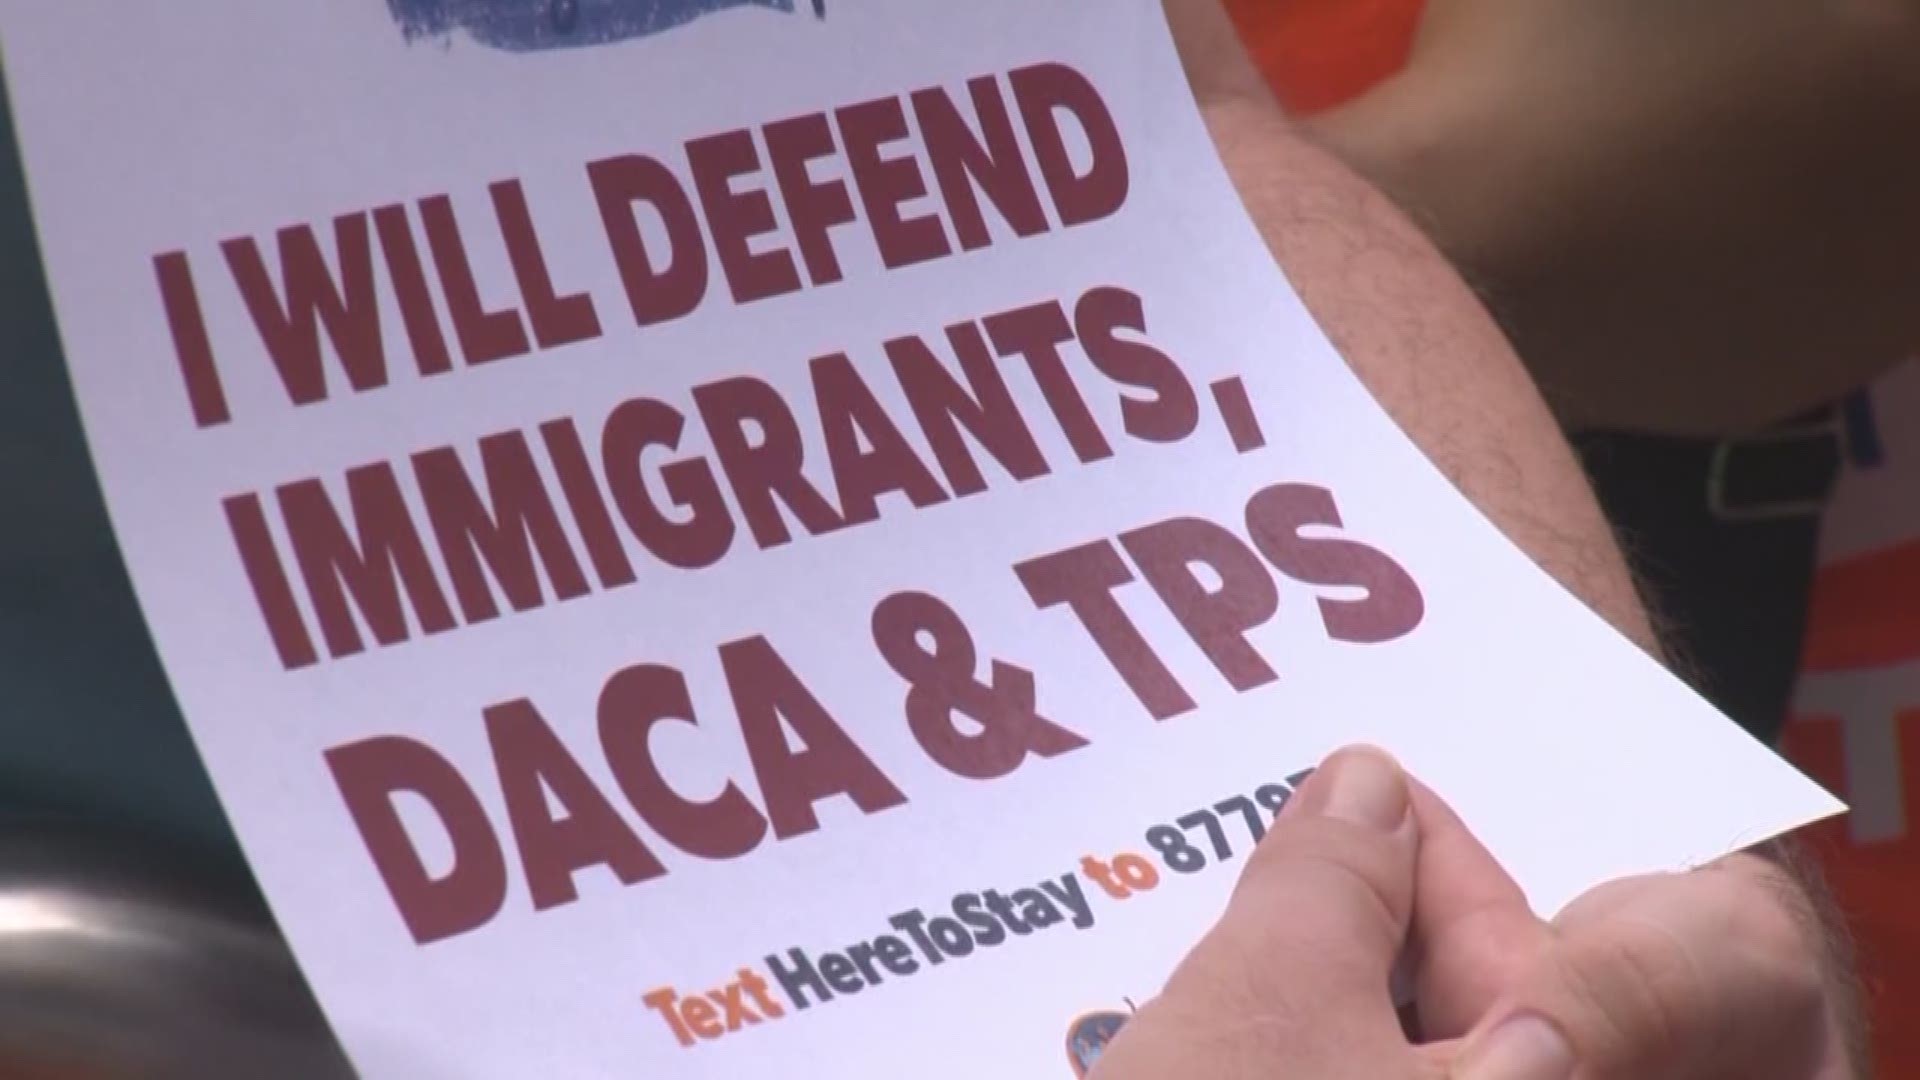 San Antonians protested downtown, advocating for the protection of undocumented immigrants brought to the U.S. as children.